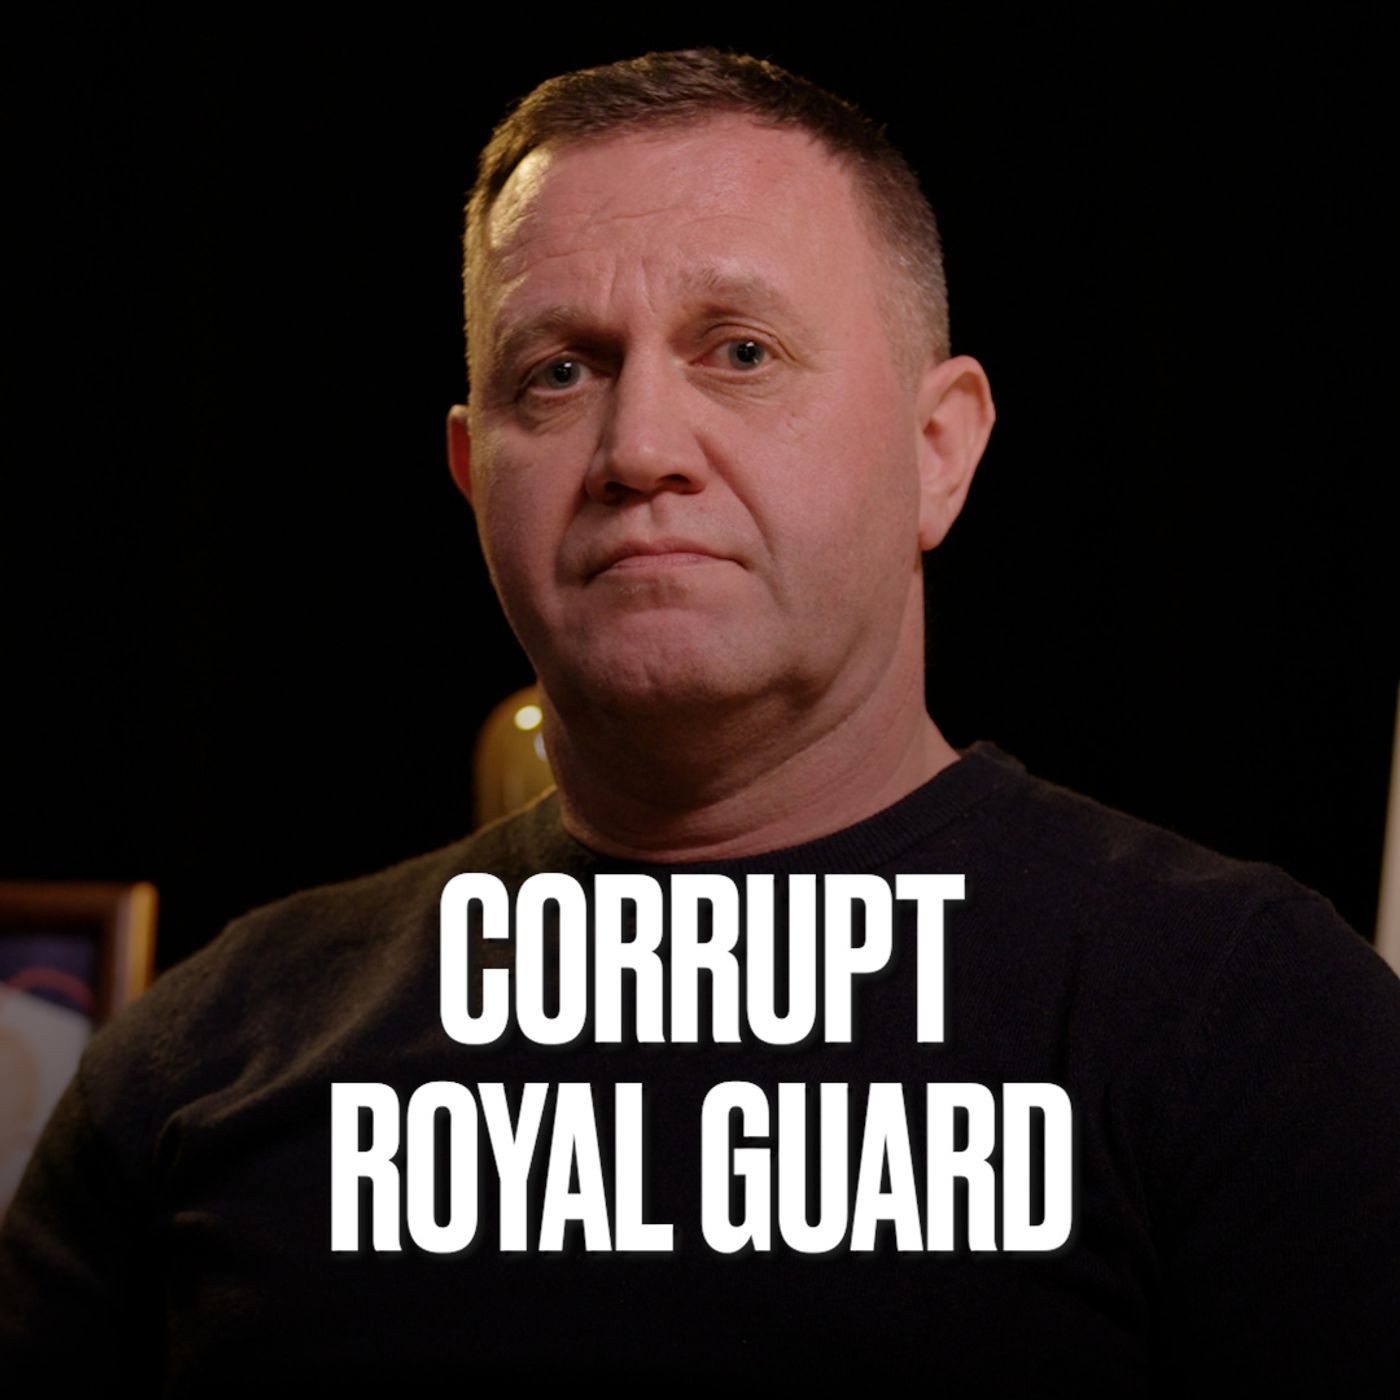 S2 Ep5: Corrupt Royal Guard: Exposing Prince Andrew